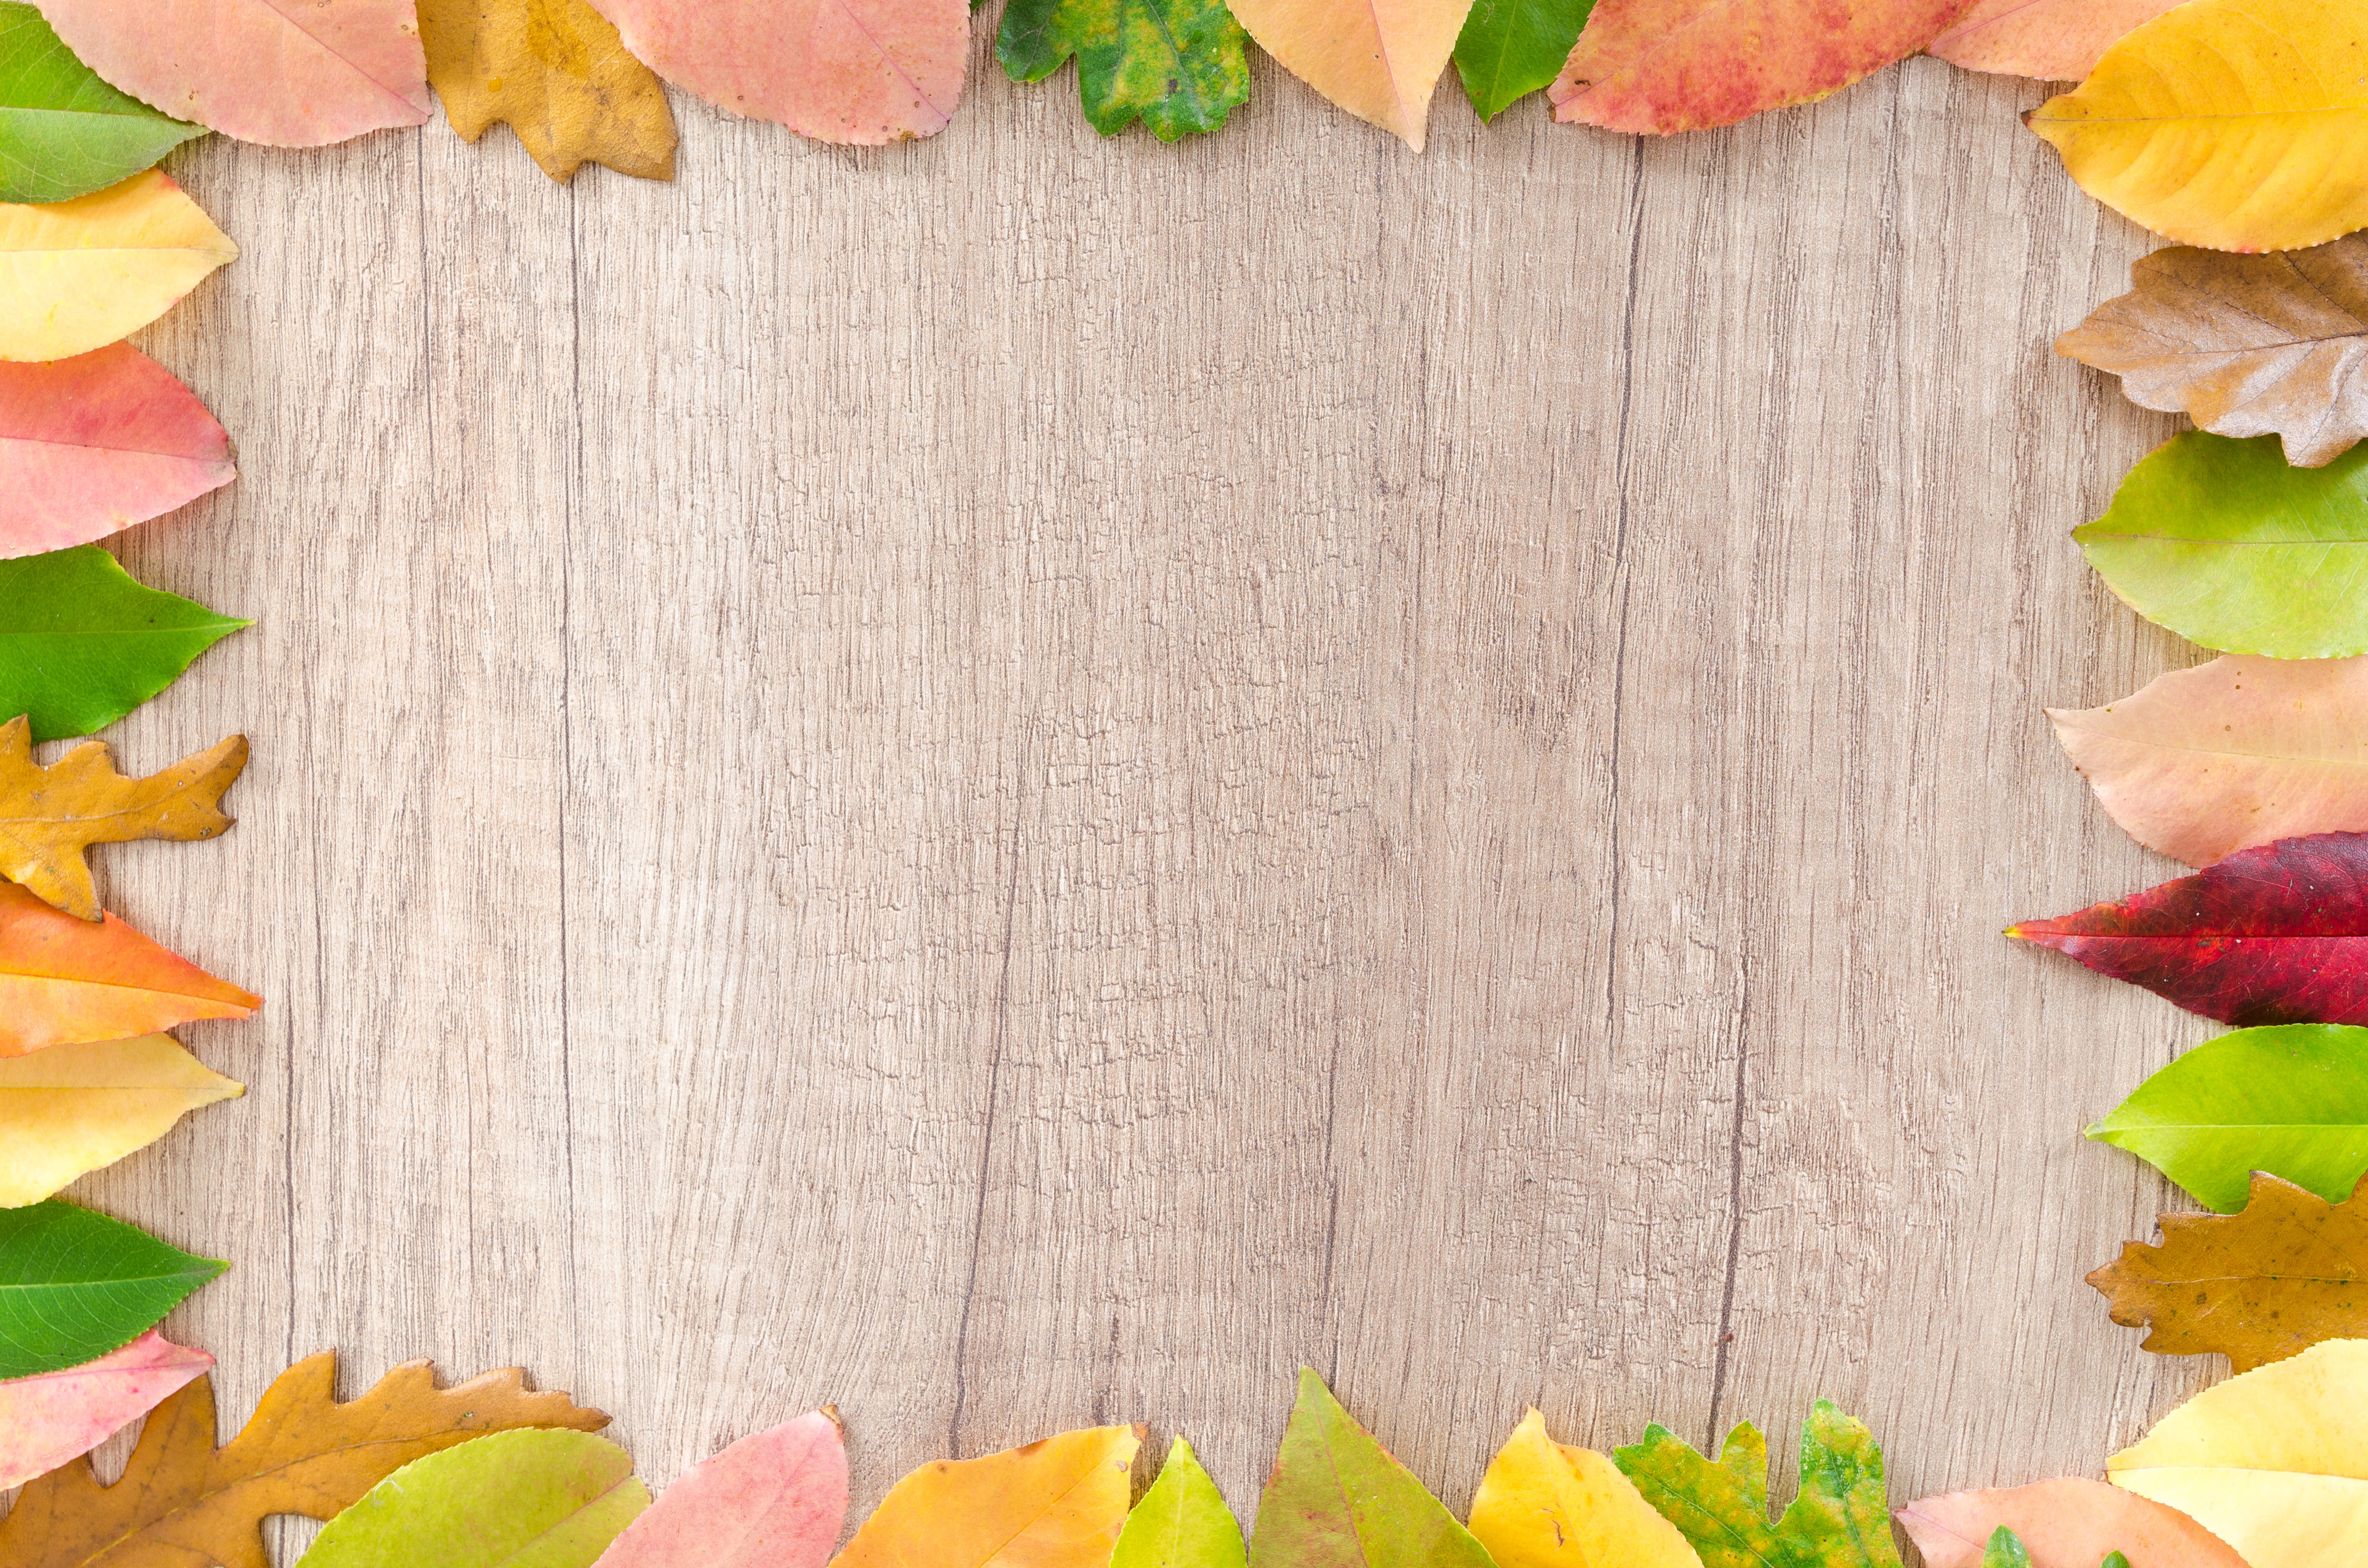 Assorted Leaves Piled on Border of Brown Wooden Board, background